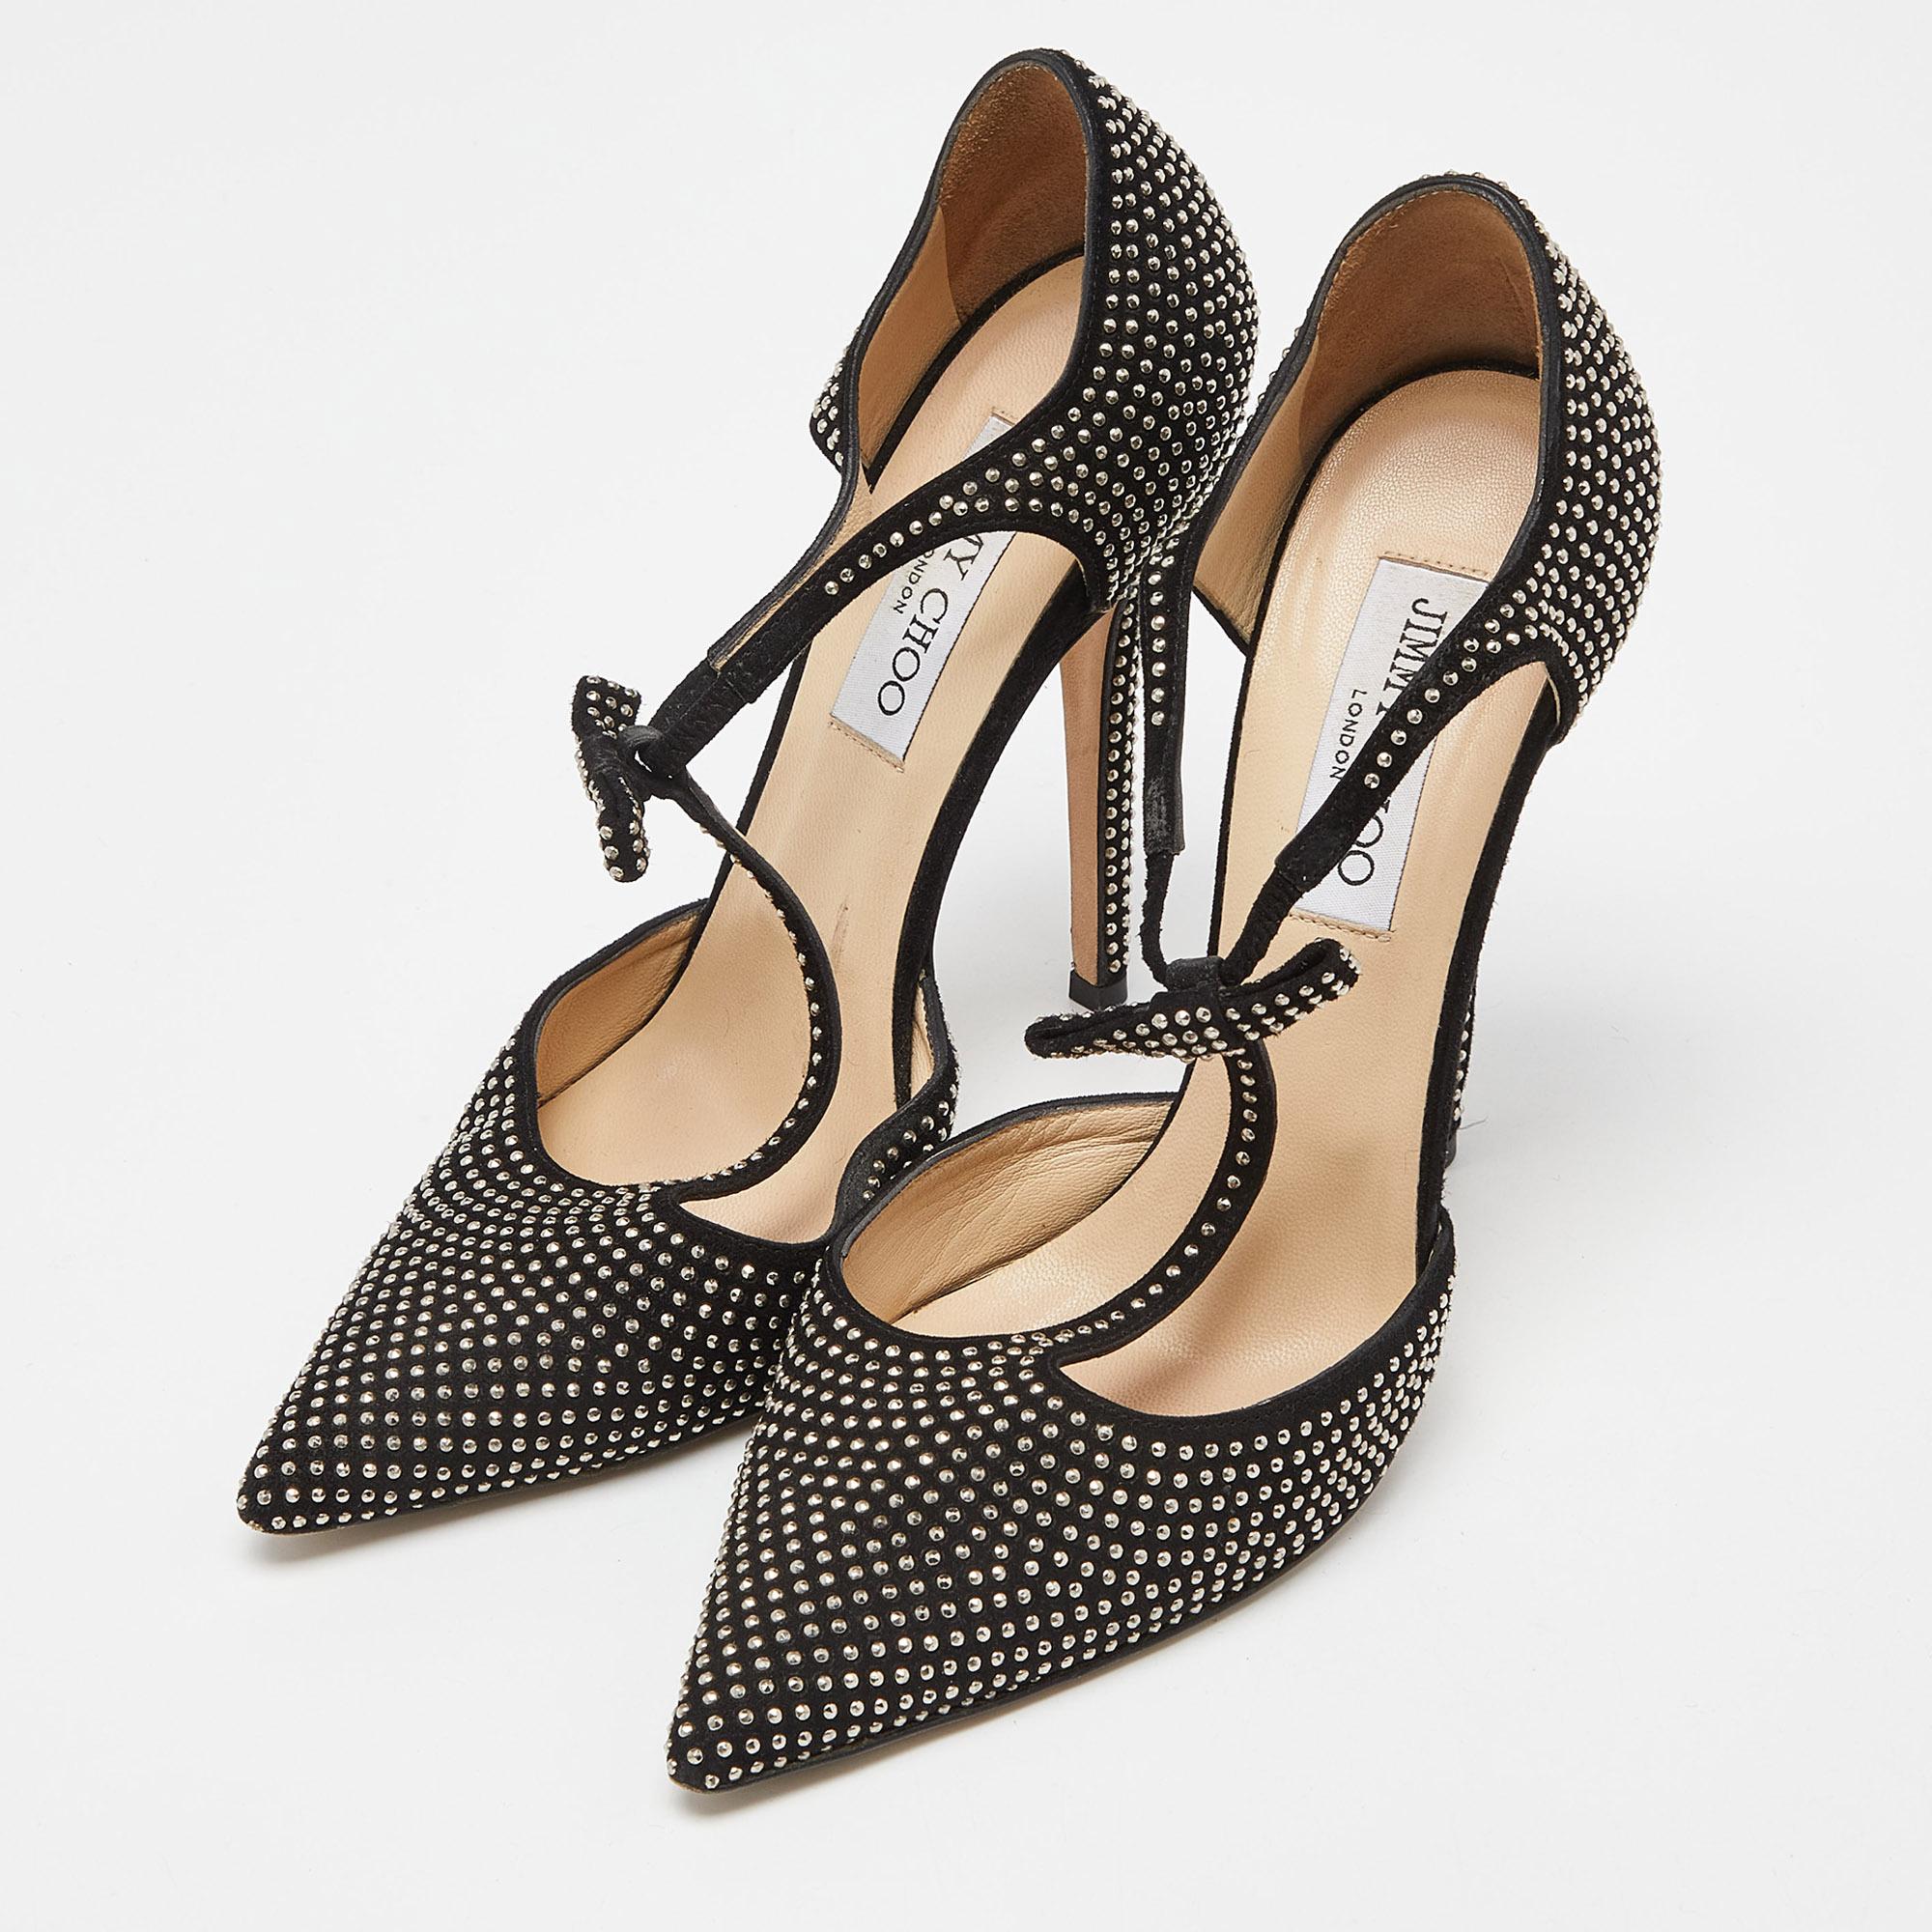 Deliver the most unforgettable looks with these pumps from Jimmy Choo! From their shape to their overall appeal, they are utterly mesmerizing. The pumps come crafted from suede and are detailed with studs, and a T-bar design.

